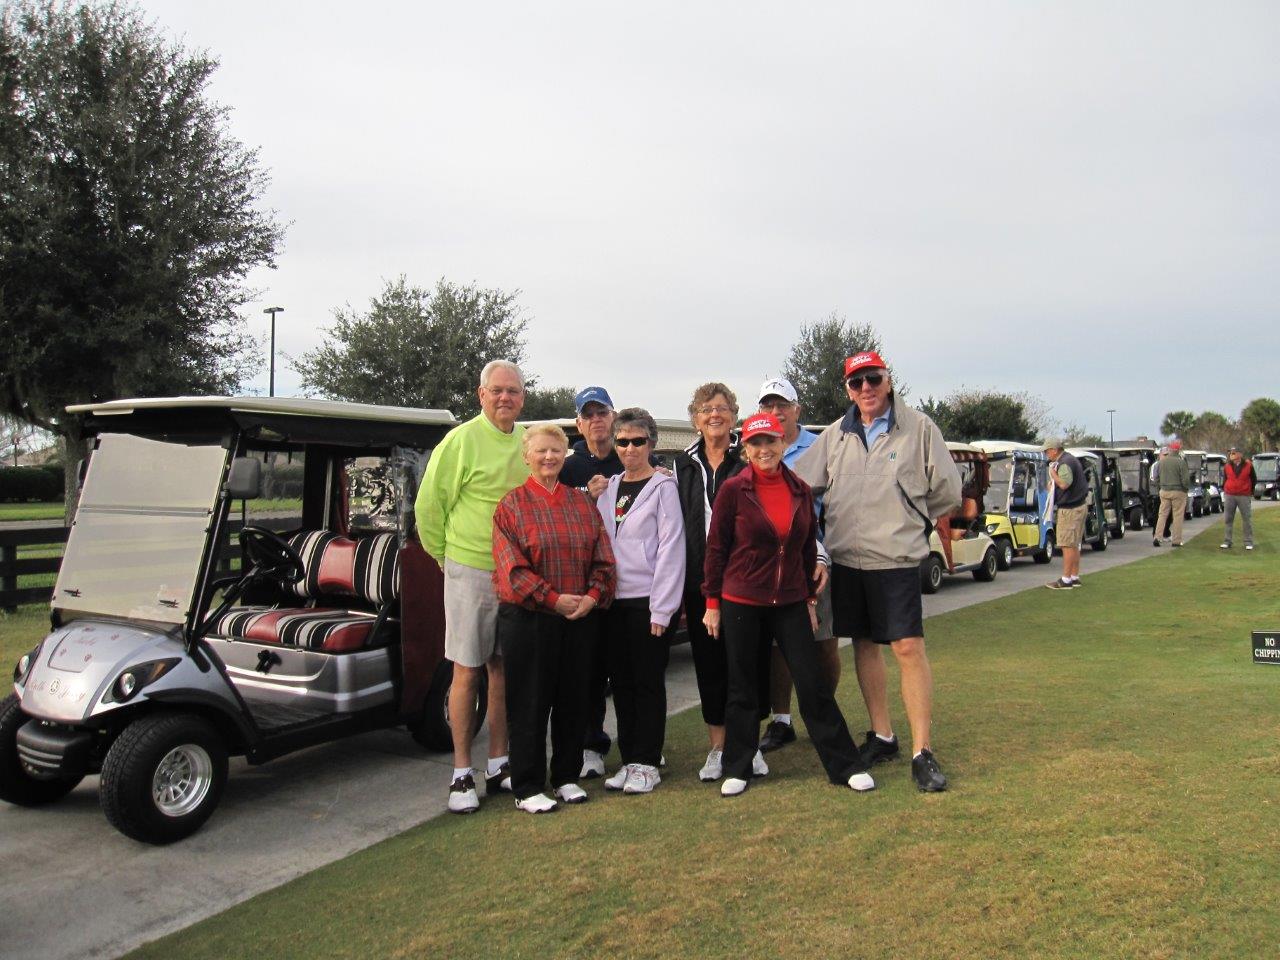 Christmas Day Golf Group<br />
Happy Days!